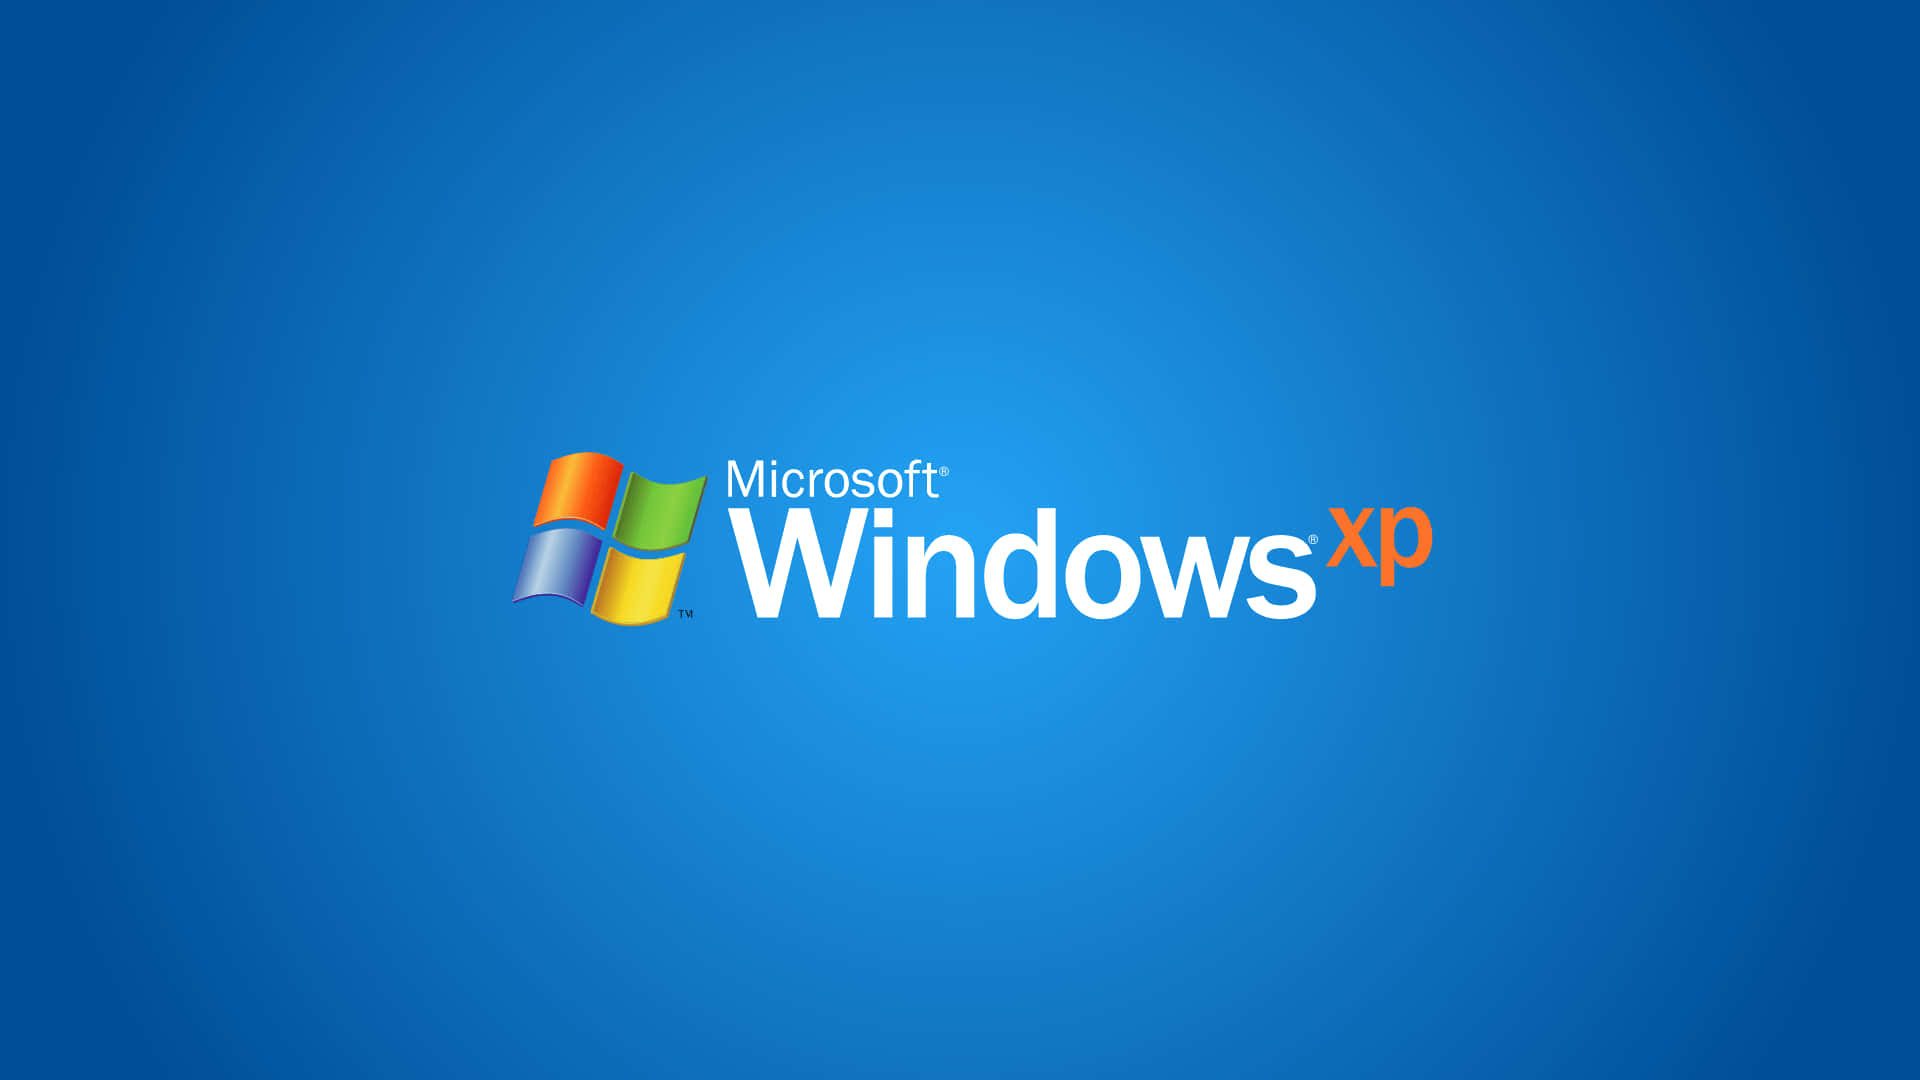 Welcome to a world of possibilities with Windows XP